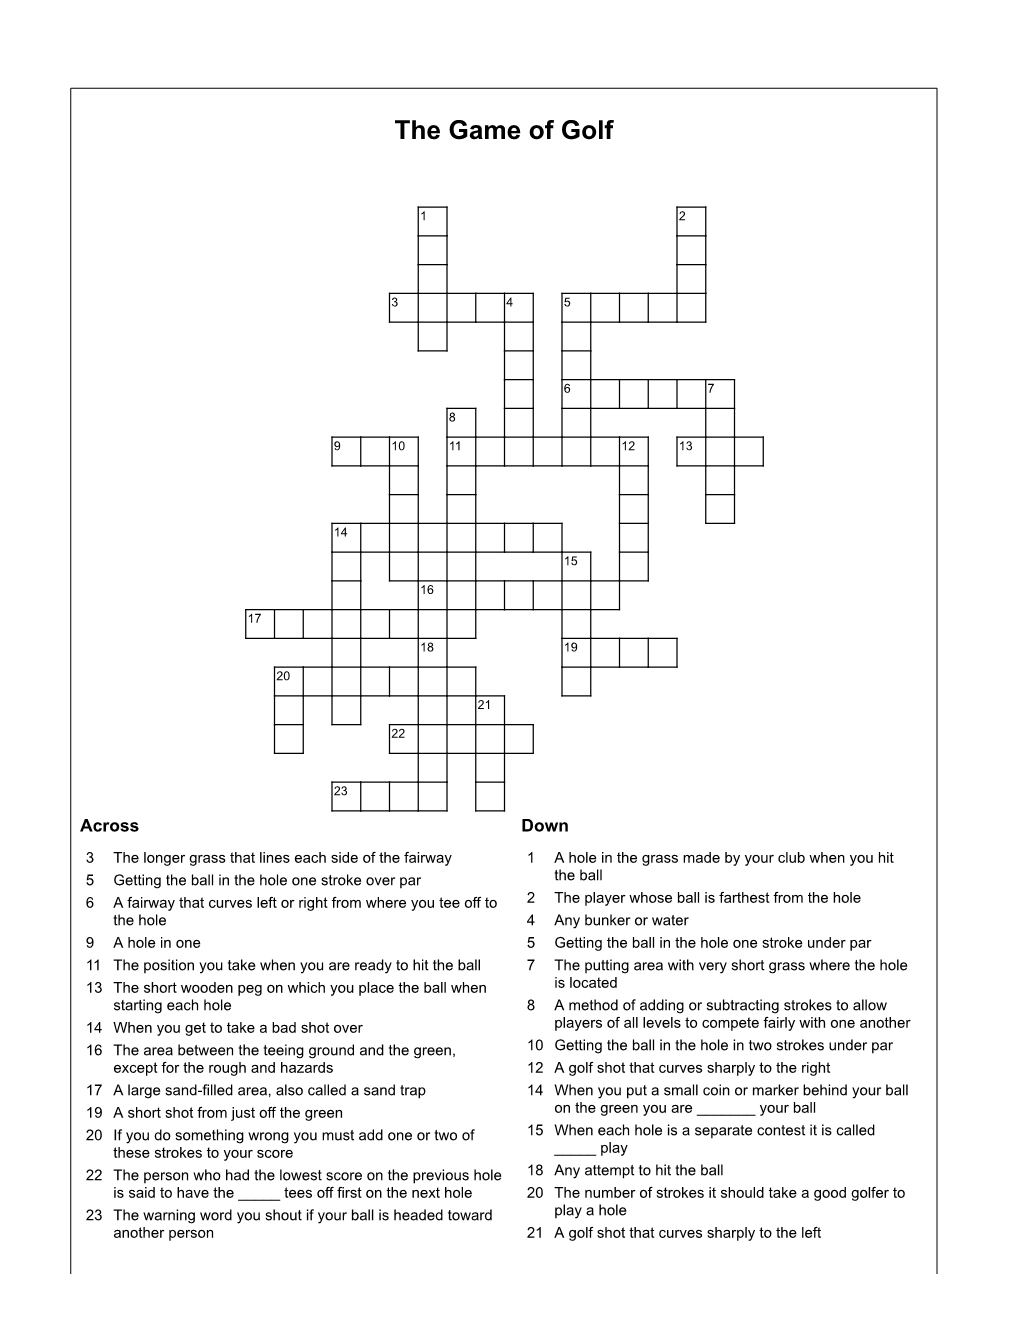 The Game of Golf Crossword Puzzle